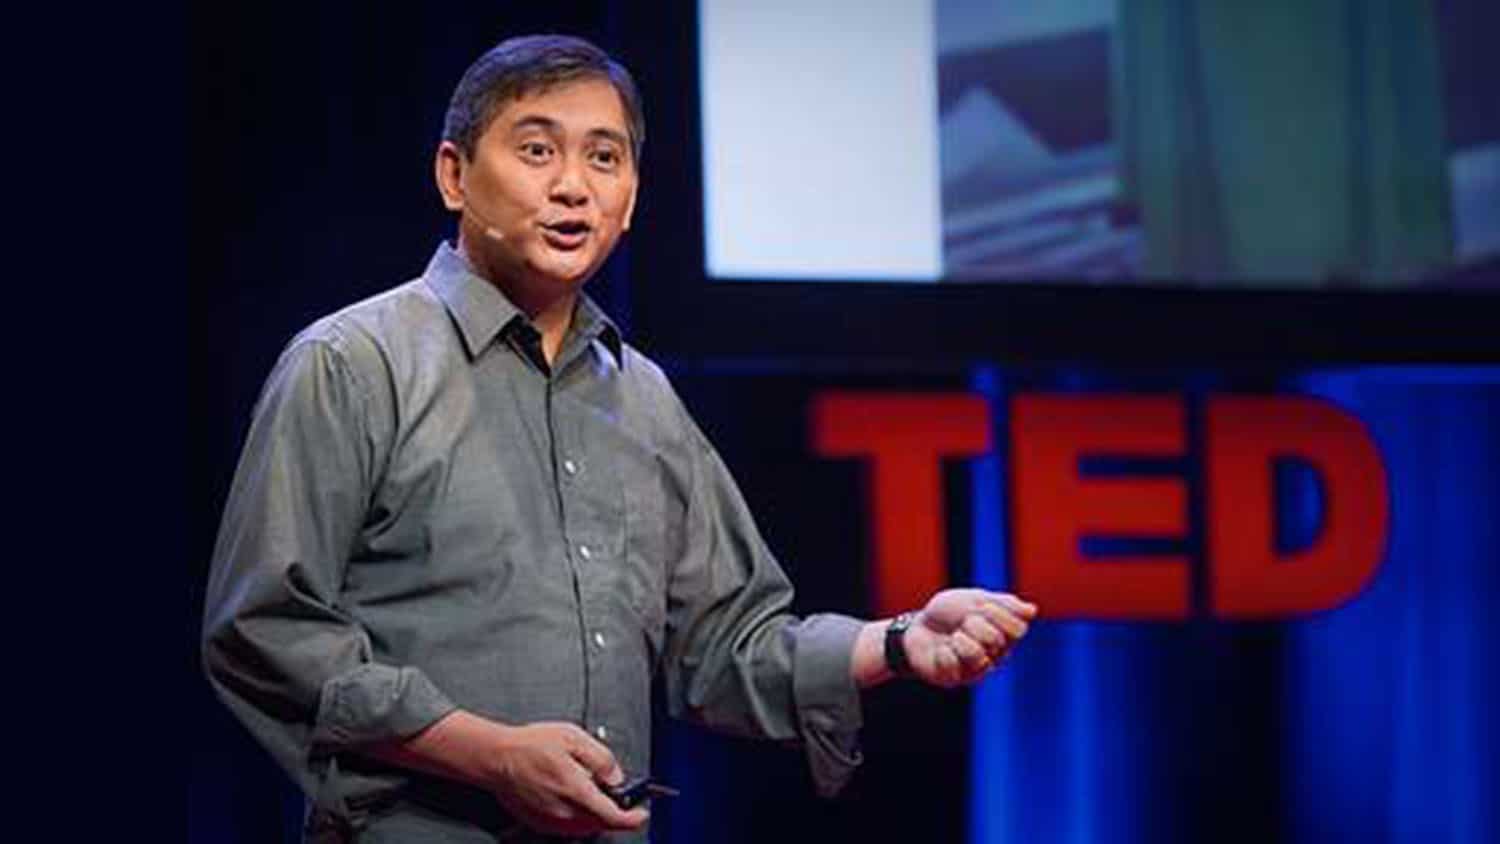 Dr. Francis de los Reyes stands on a stage addressing listeners for a TED Talk on "Sanitation as a Basic Human Right."